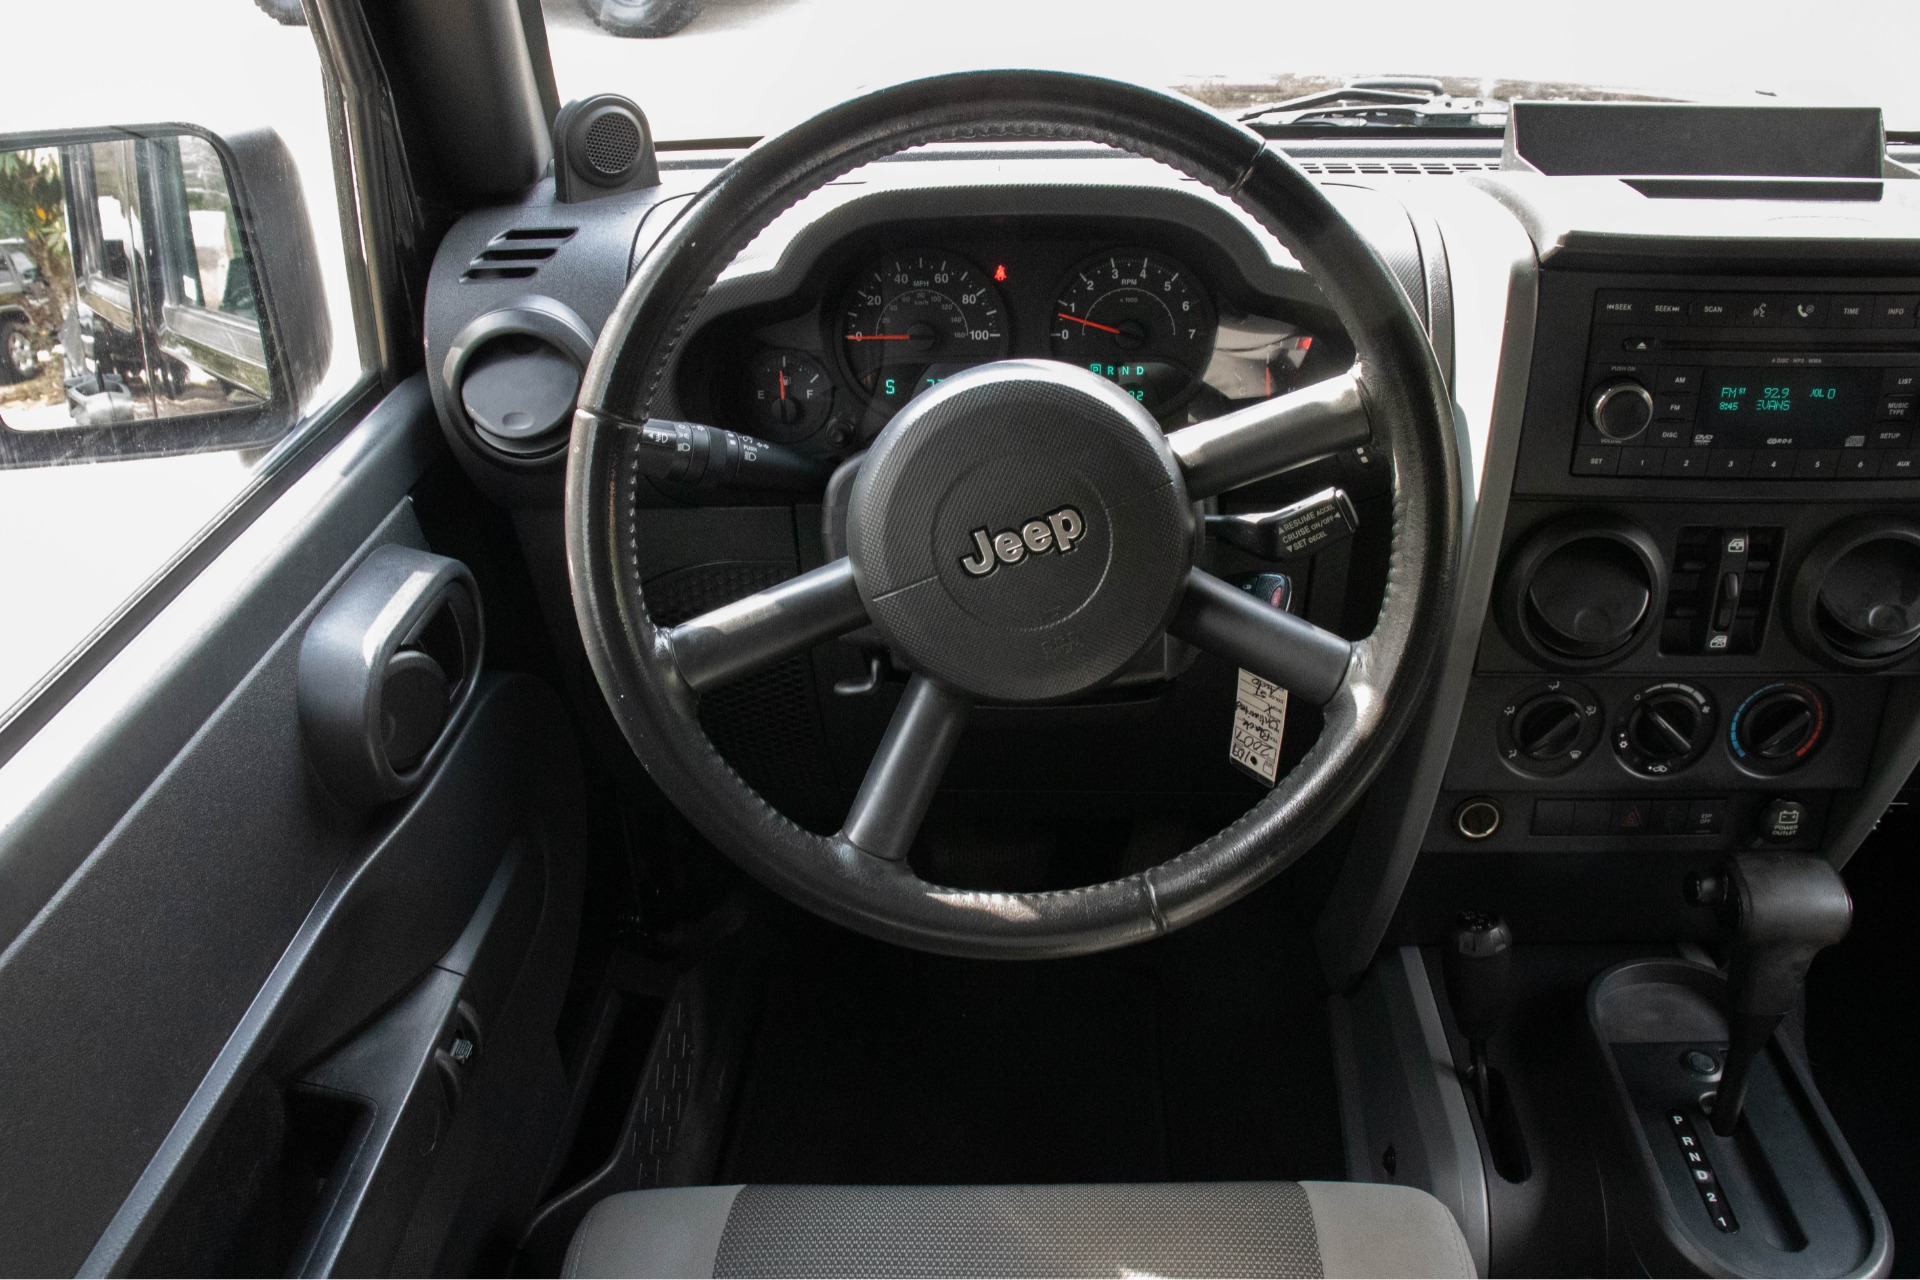 Used 2007 Jeep Wrangler Unlimited X For Sale ($16,995) | Select Jeeps Inc.  Stock #101145